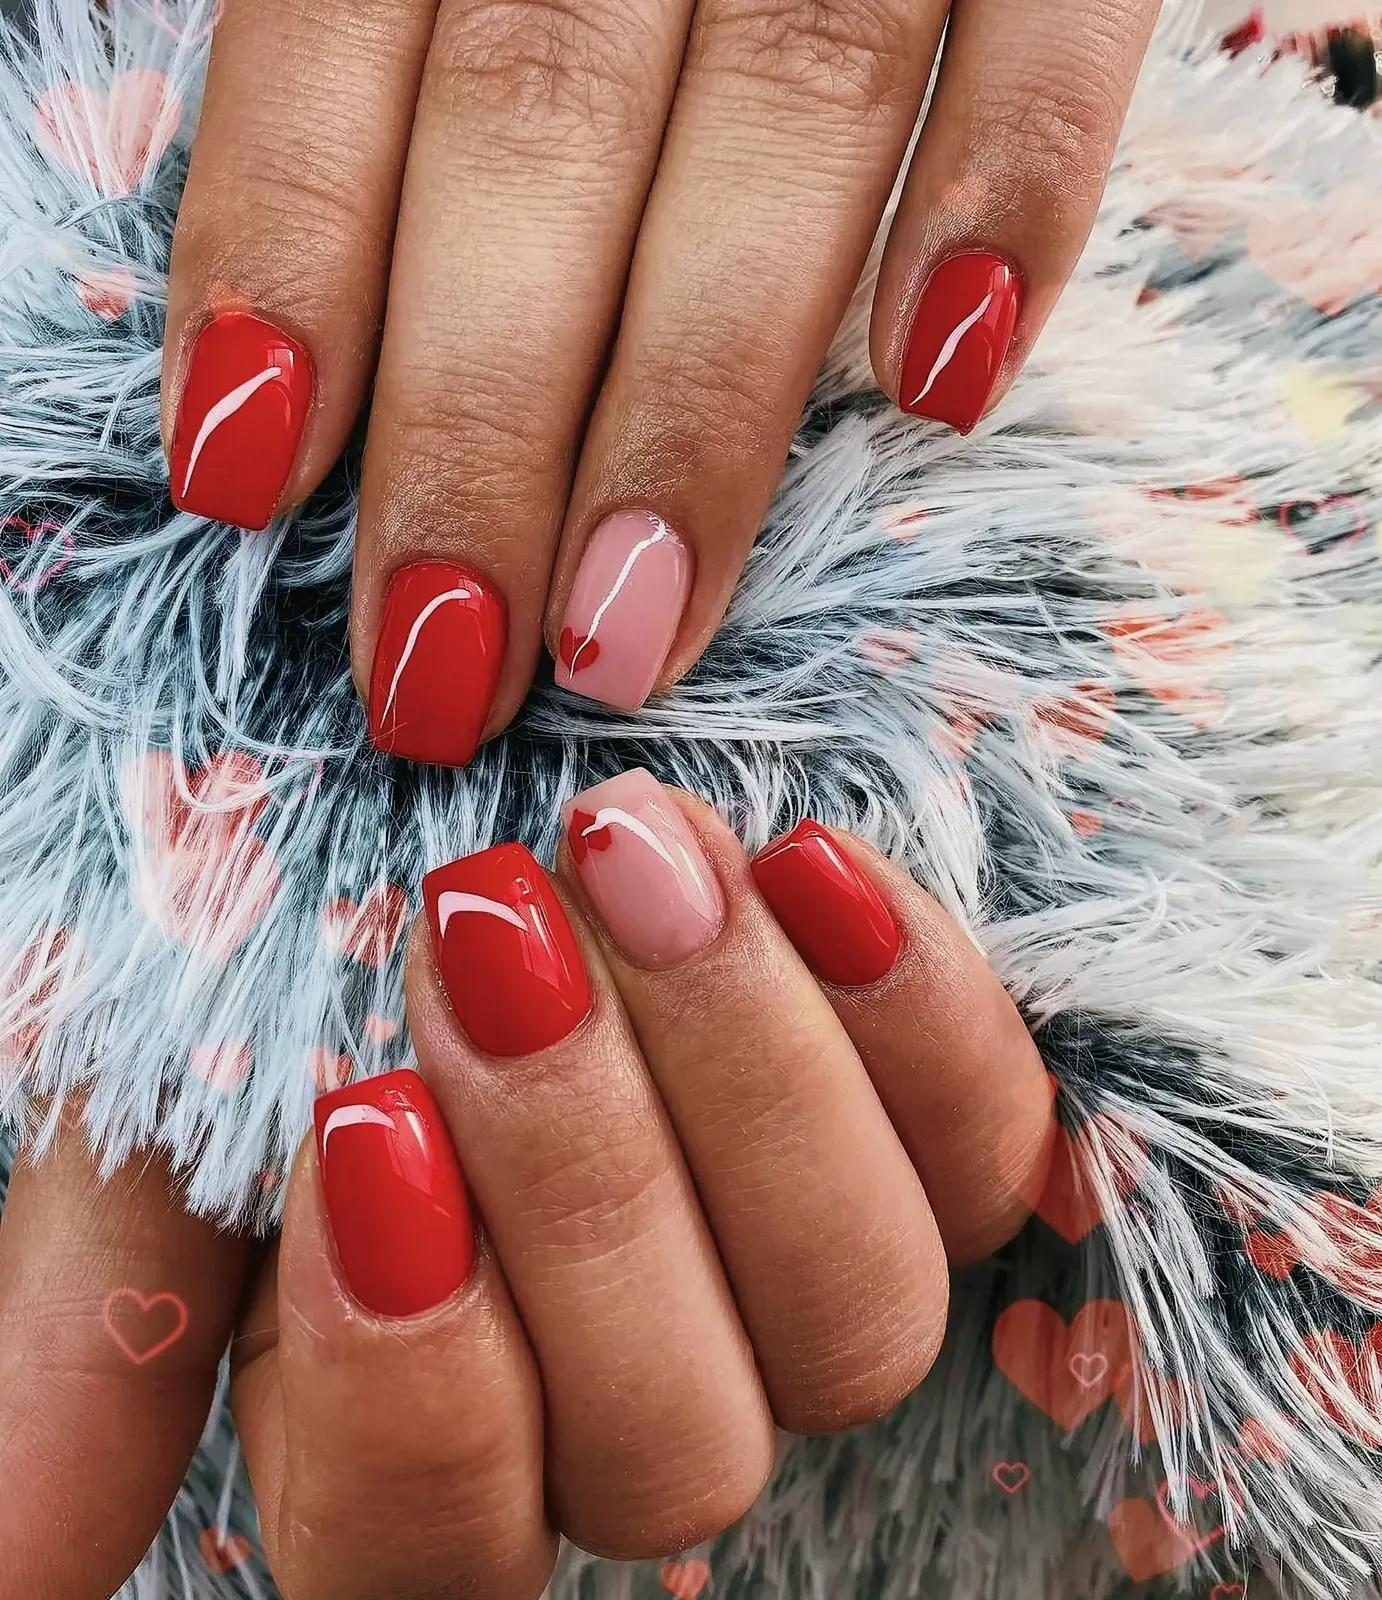 Close-up of vibrant red nails with a glossy finish